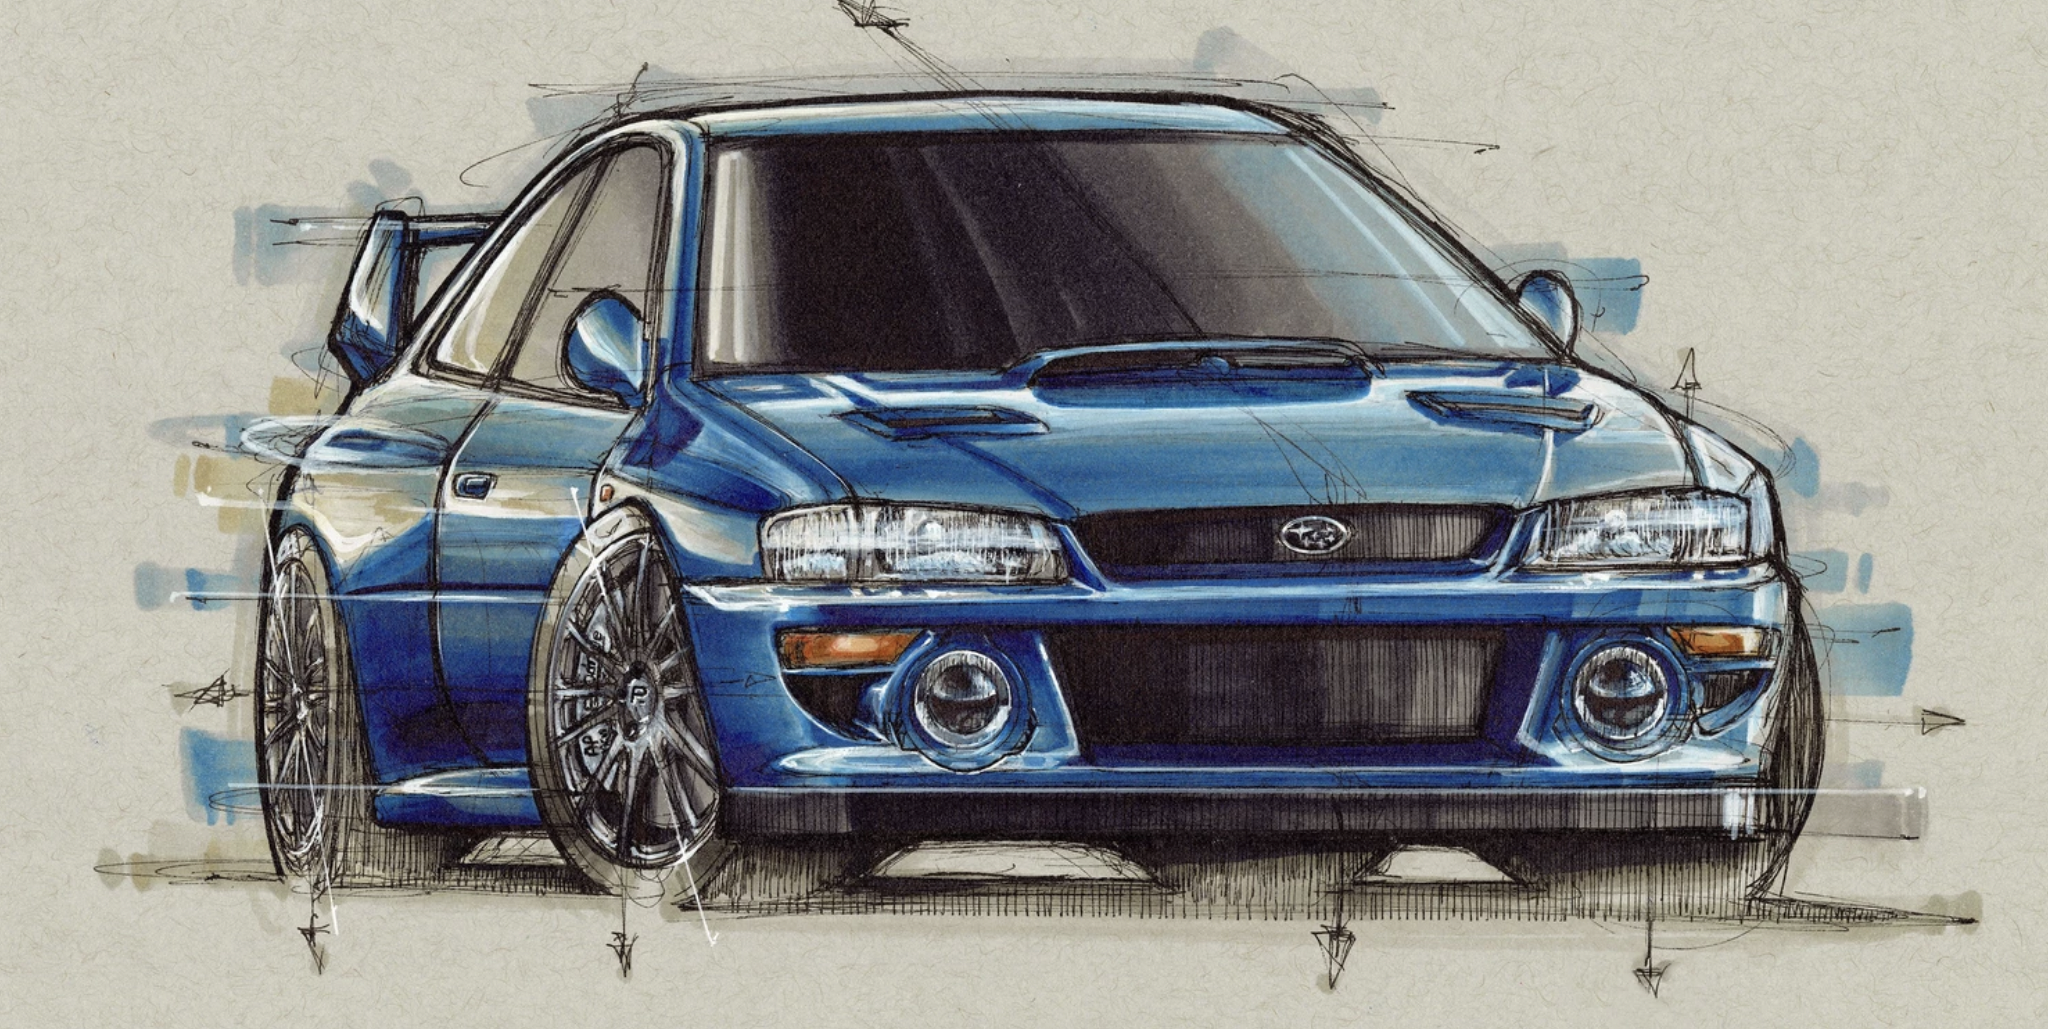 Prodrive's P25 Will Be an Impreza 22B Revival With 400 HP